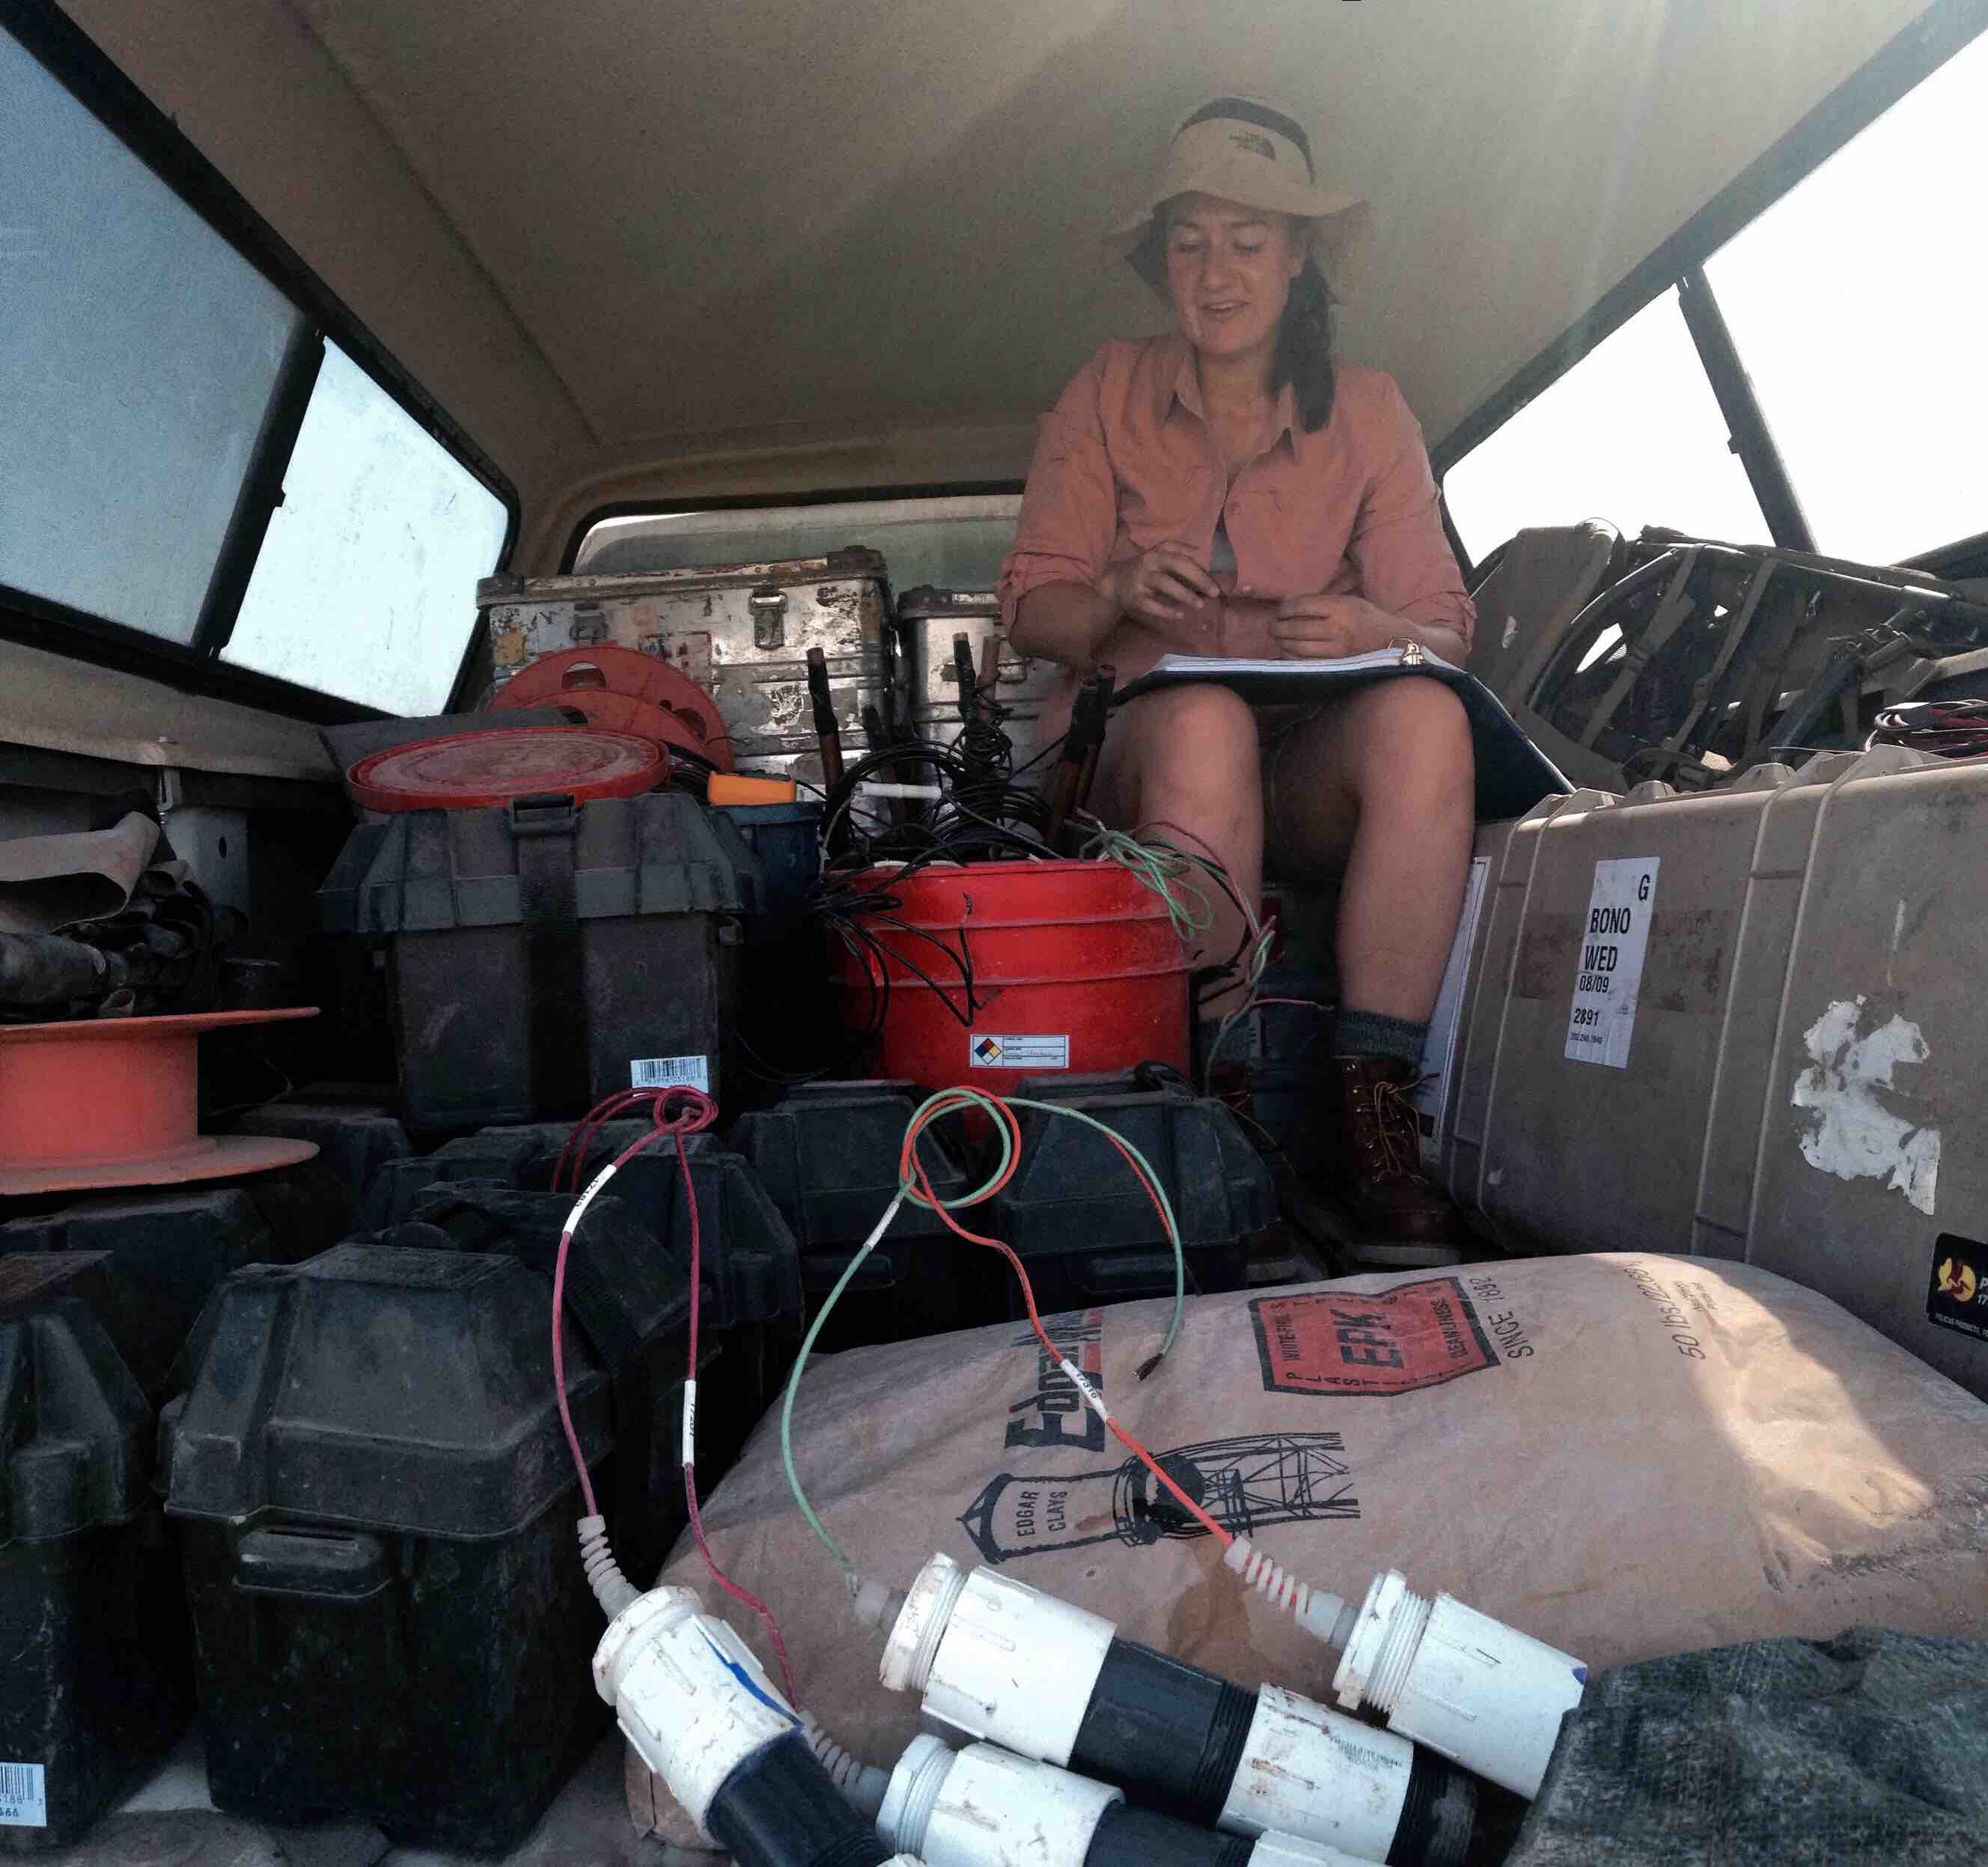 Eva sitting in her work truck on a bunch of experimental gear with a notebook.